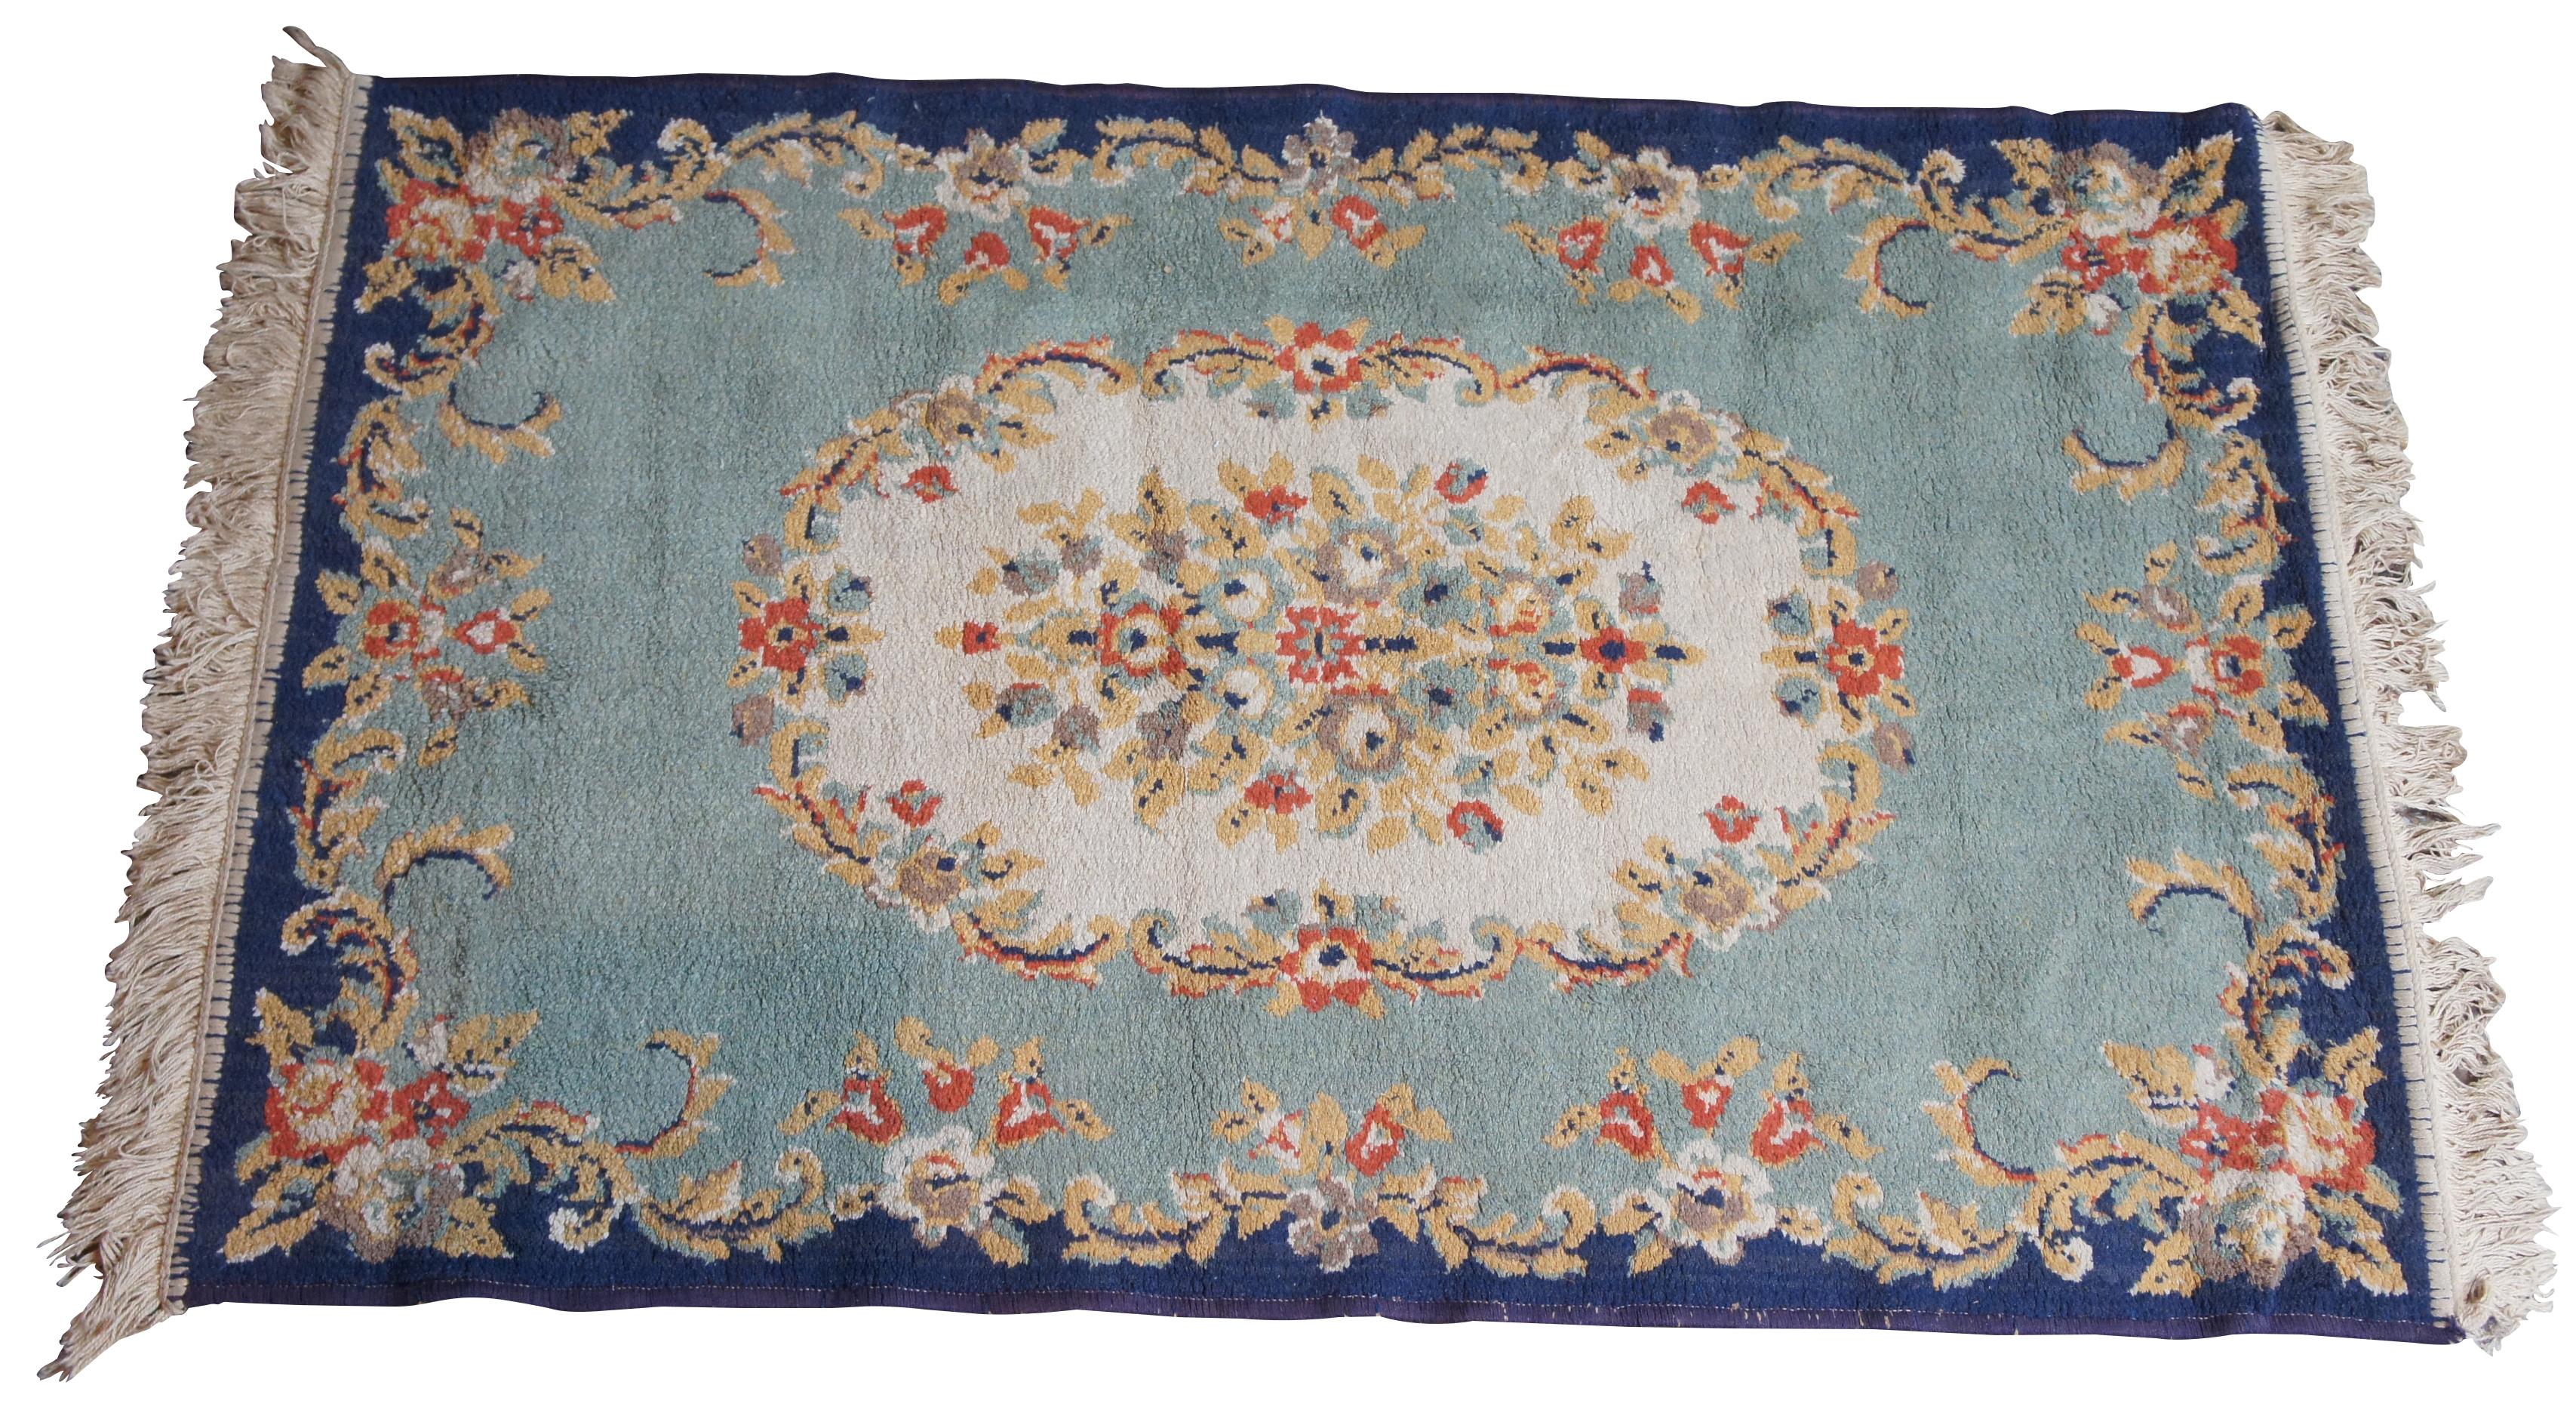 Aubusson area rug with a field of blues accented by gold, creme and red flowers. Measure: 46